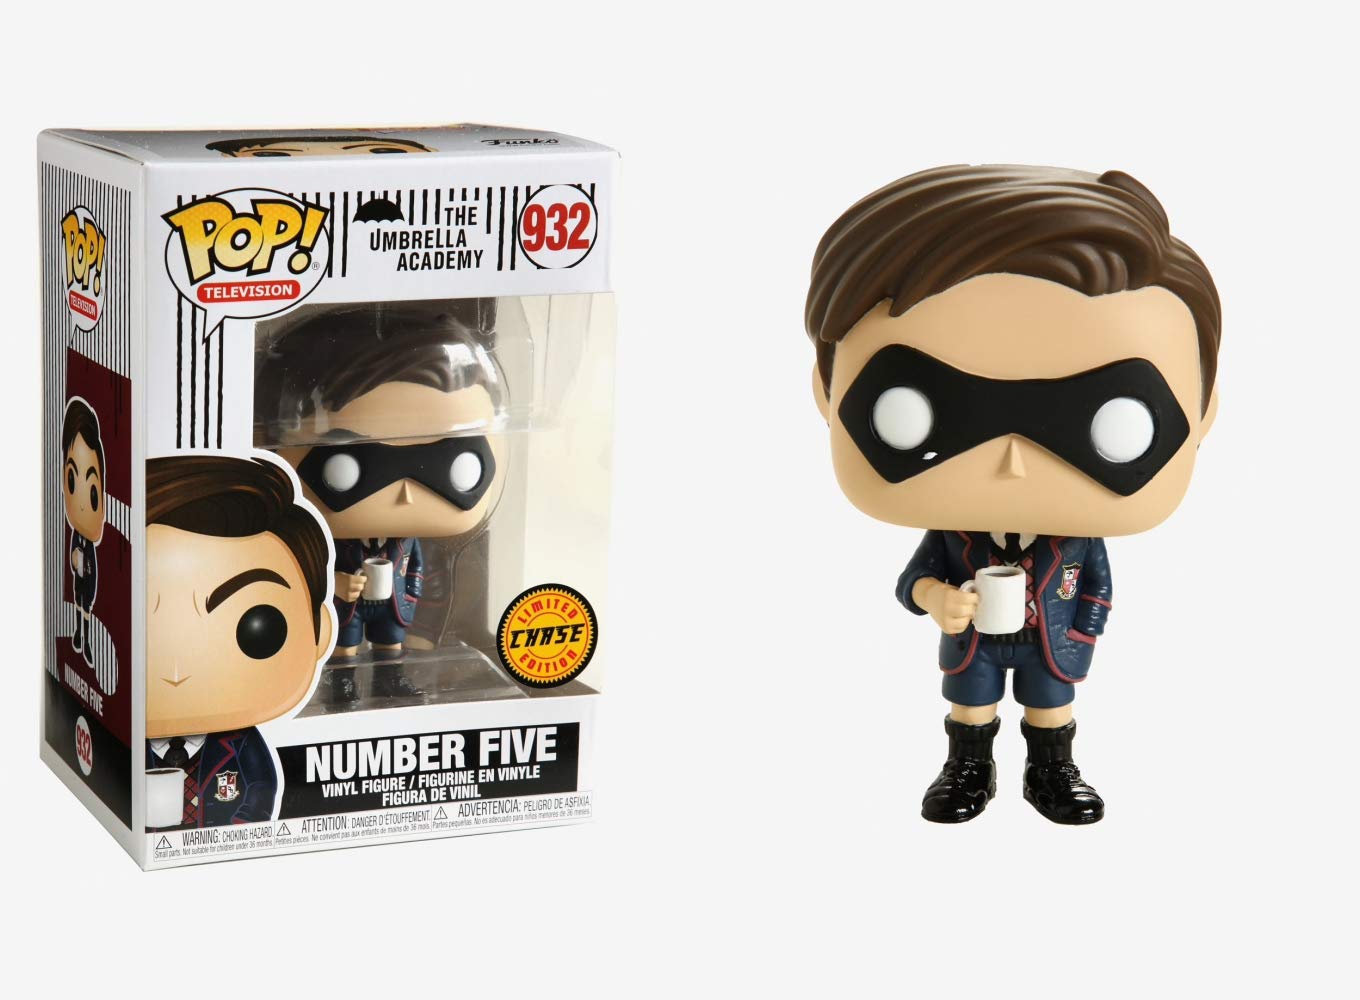 Funko POP! Television The Umbrella Academy CHASE Number Five #932 [Mask]